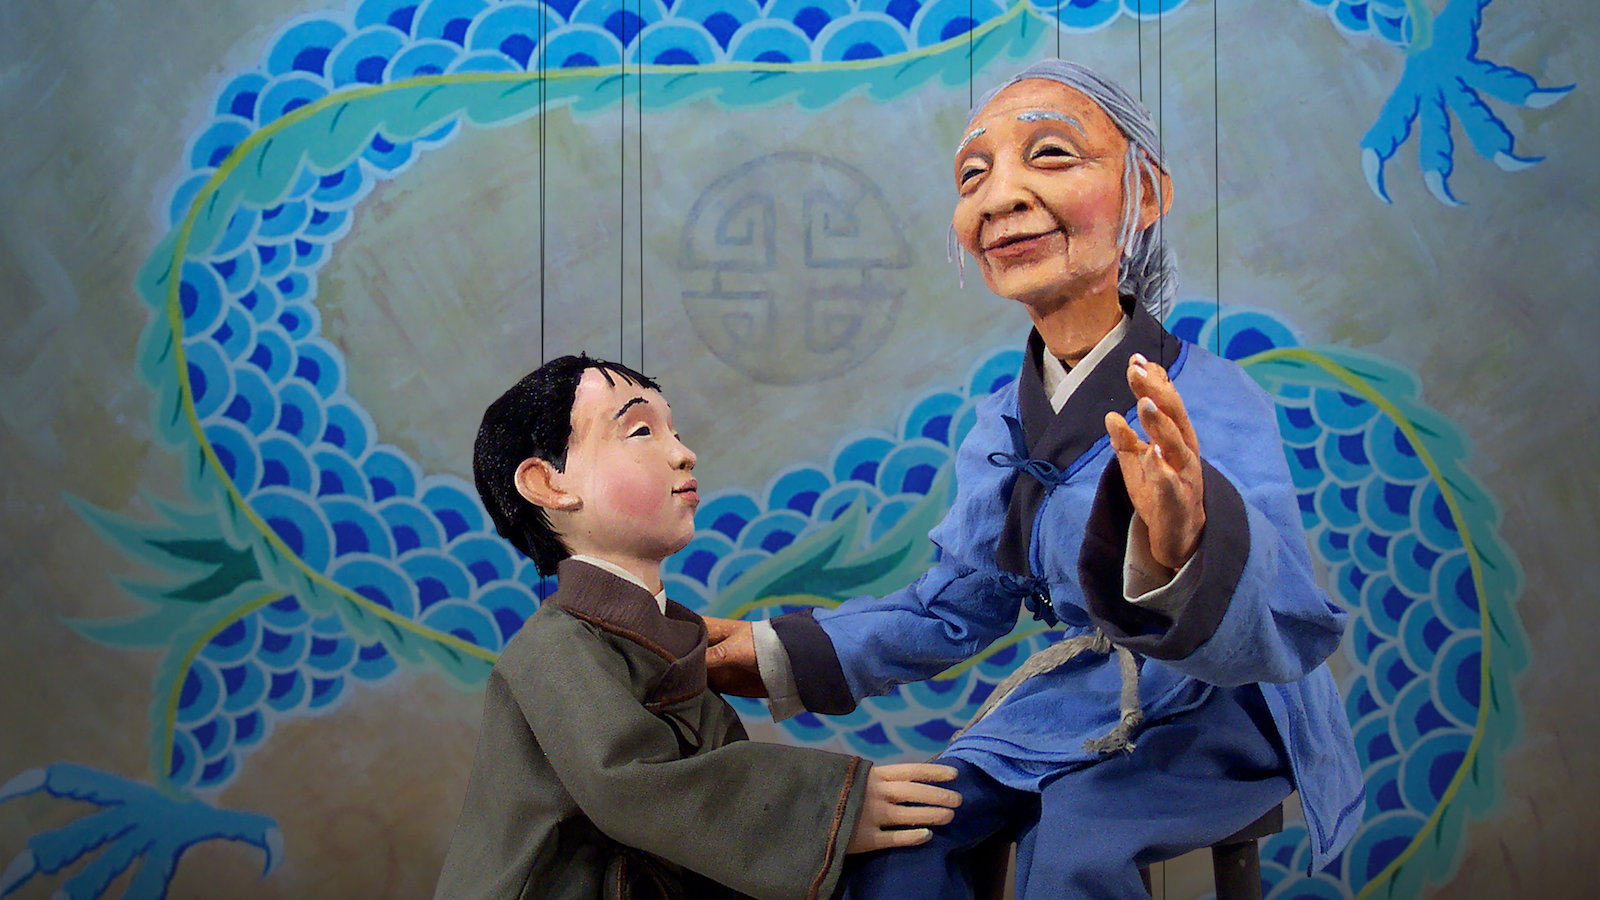 Tanglewood Marionettes presents The Dragon King